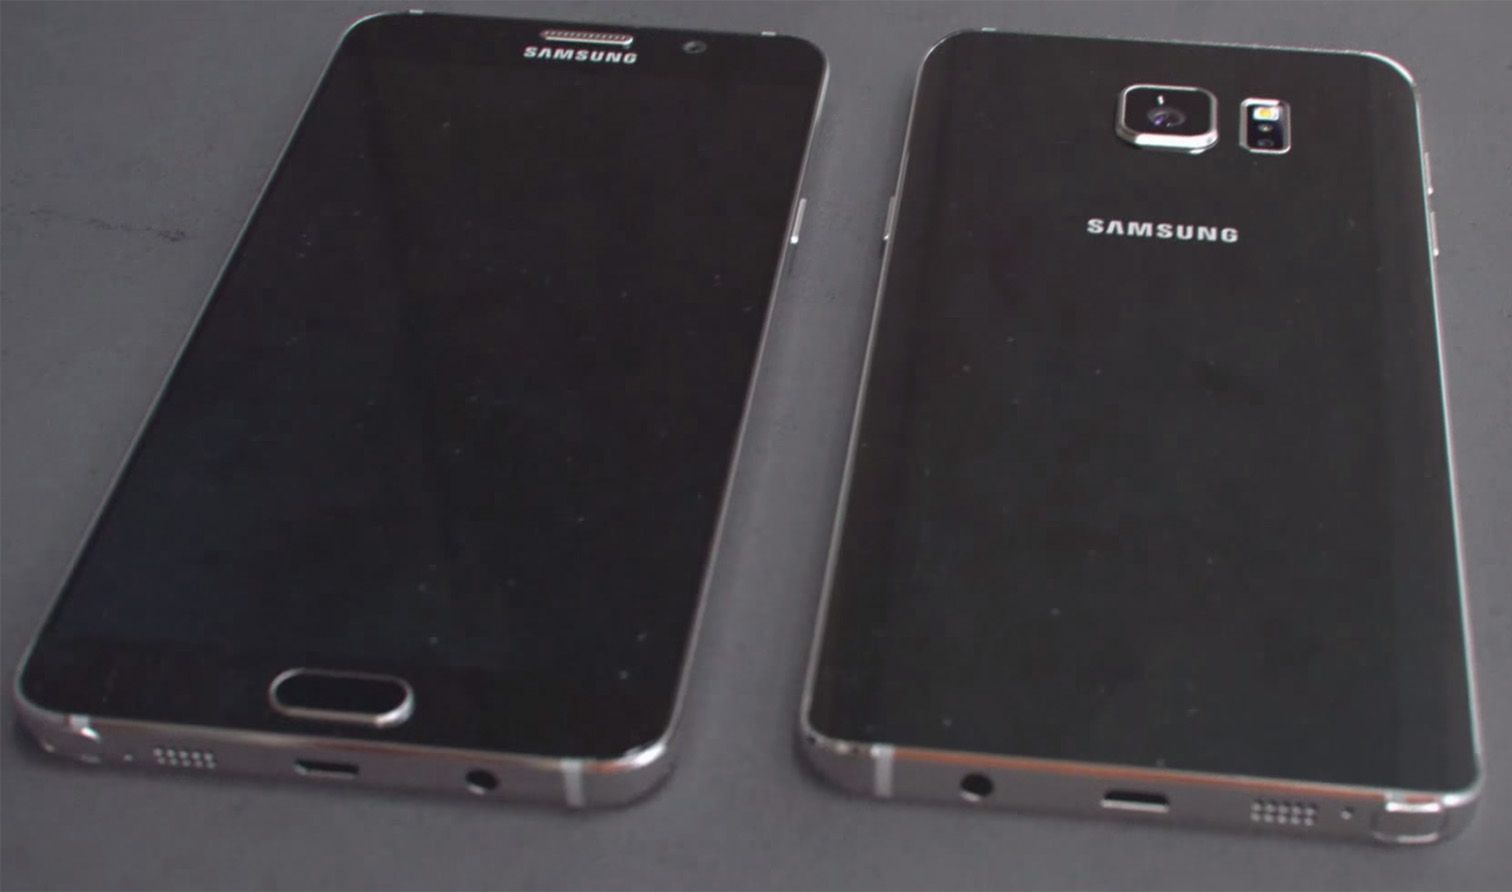 samsung galaxy note 5 to be announced on 13 august korean reports claim image 1